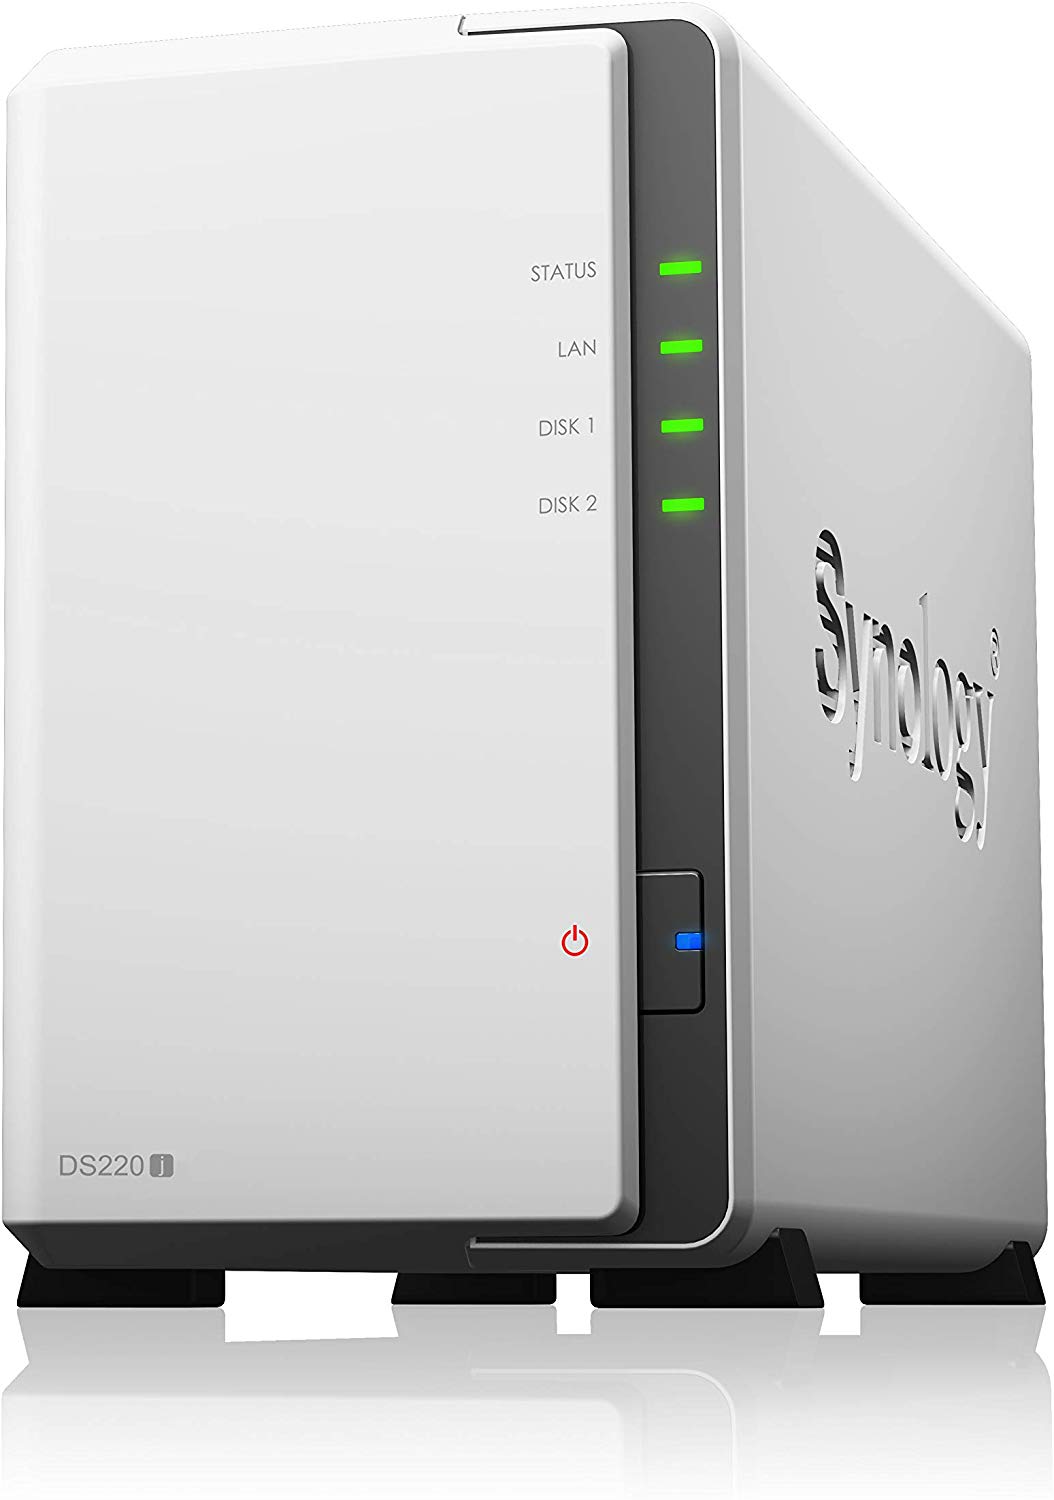 Synology Launches New DiskStation DS220j 2-Bay NAS With macOS Time Machine Support